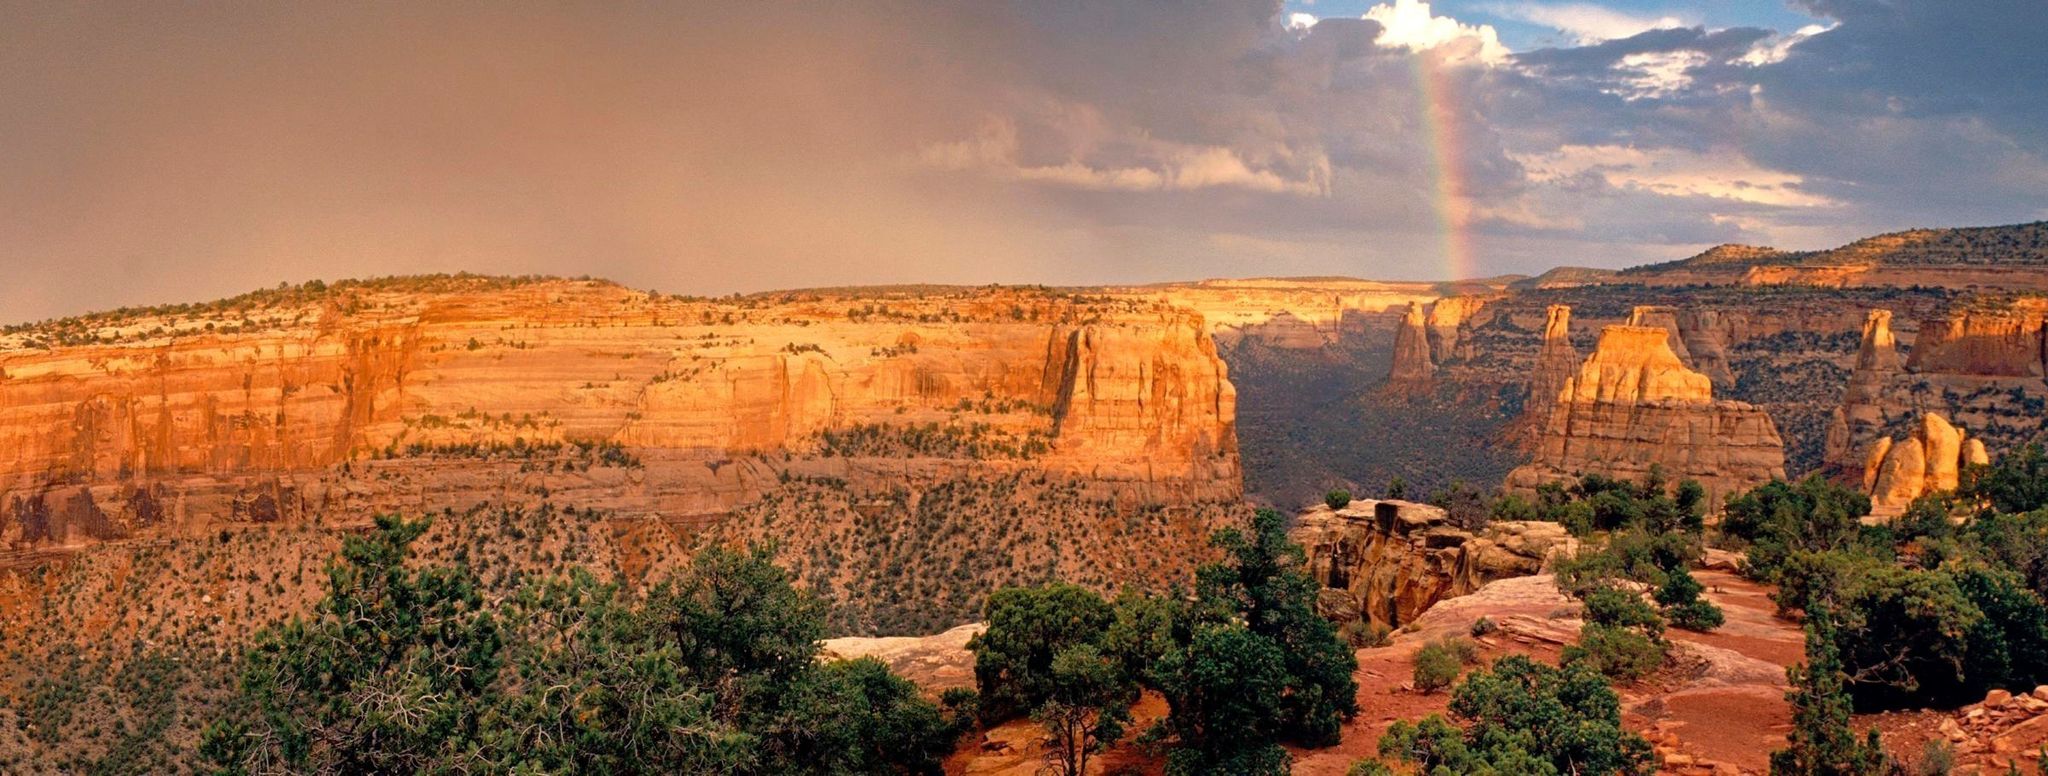 Rainbow over the rocky sandstone cliffs at Colorado National Monument.